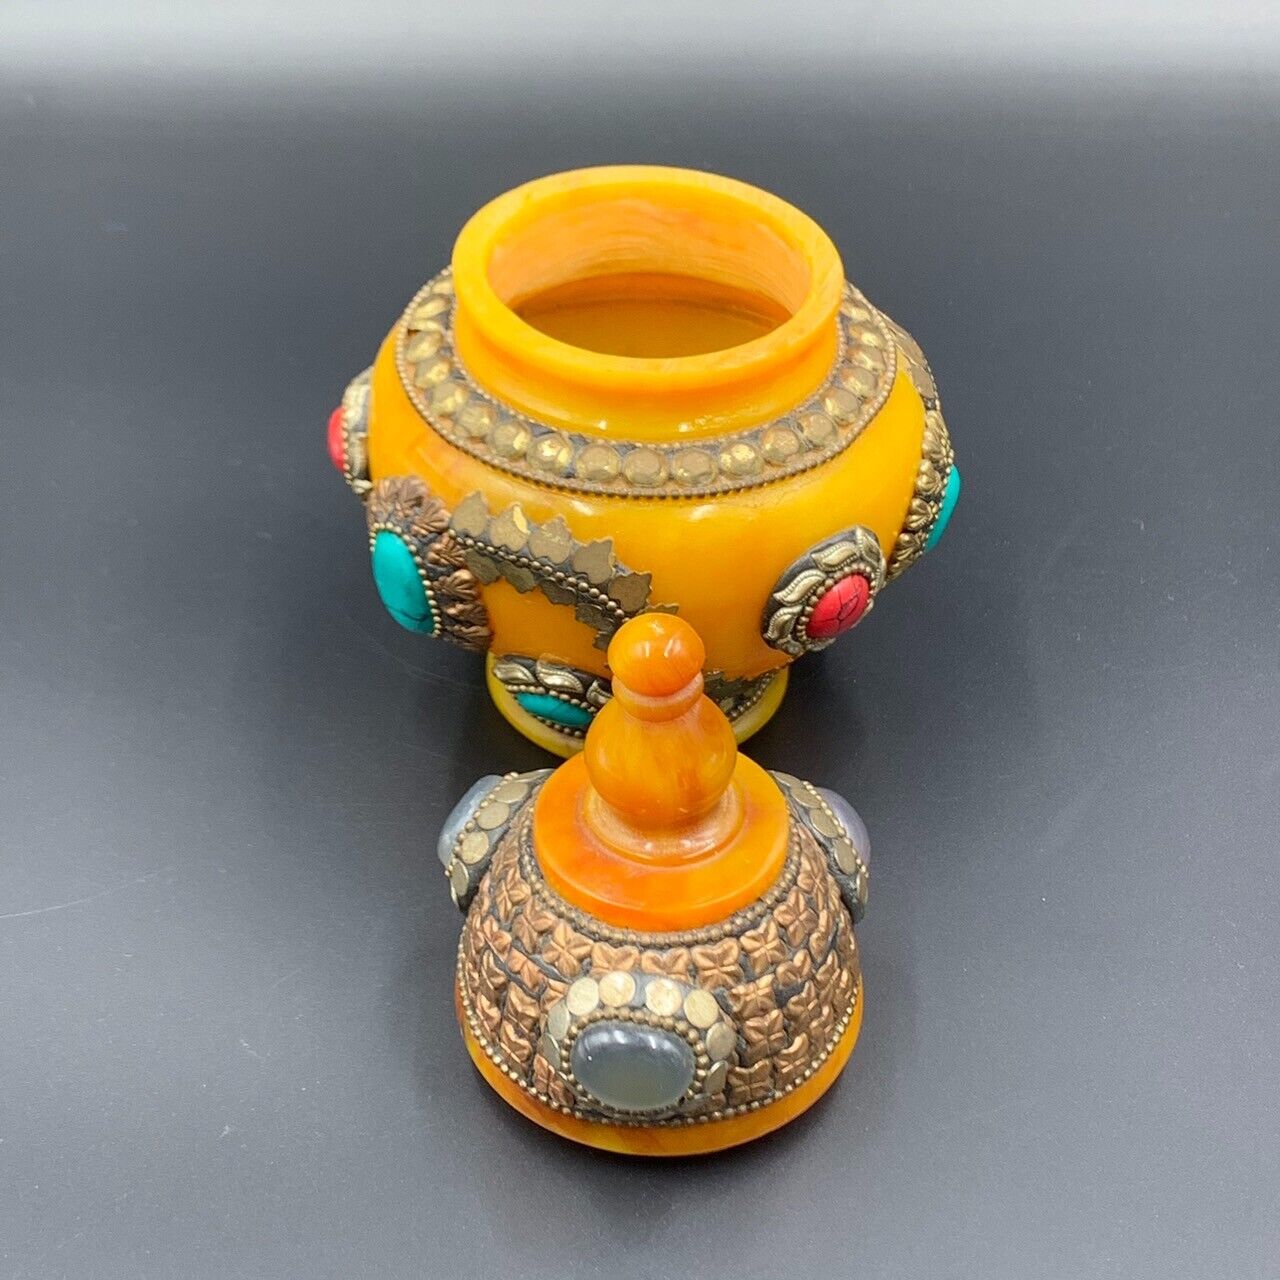 Vintage Handmade Old Nepalese Amber Jewel Jar With Agate Stones, Collectible - Image 2 of 5